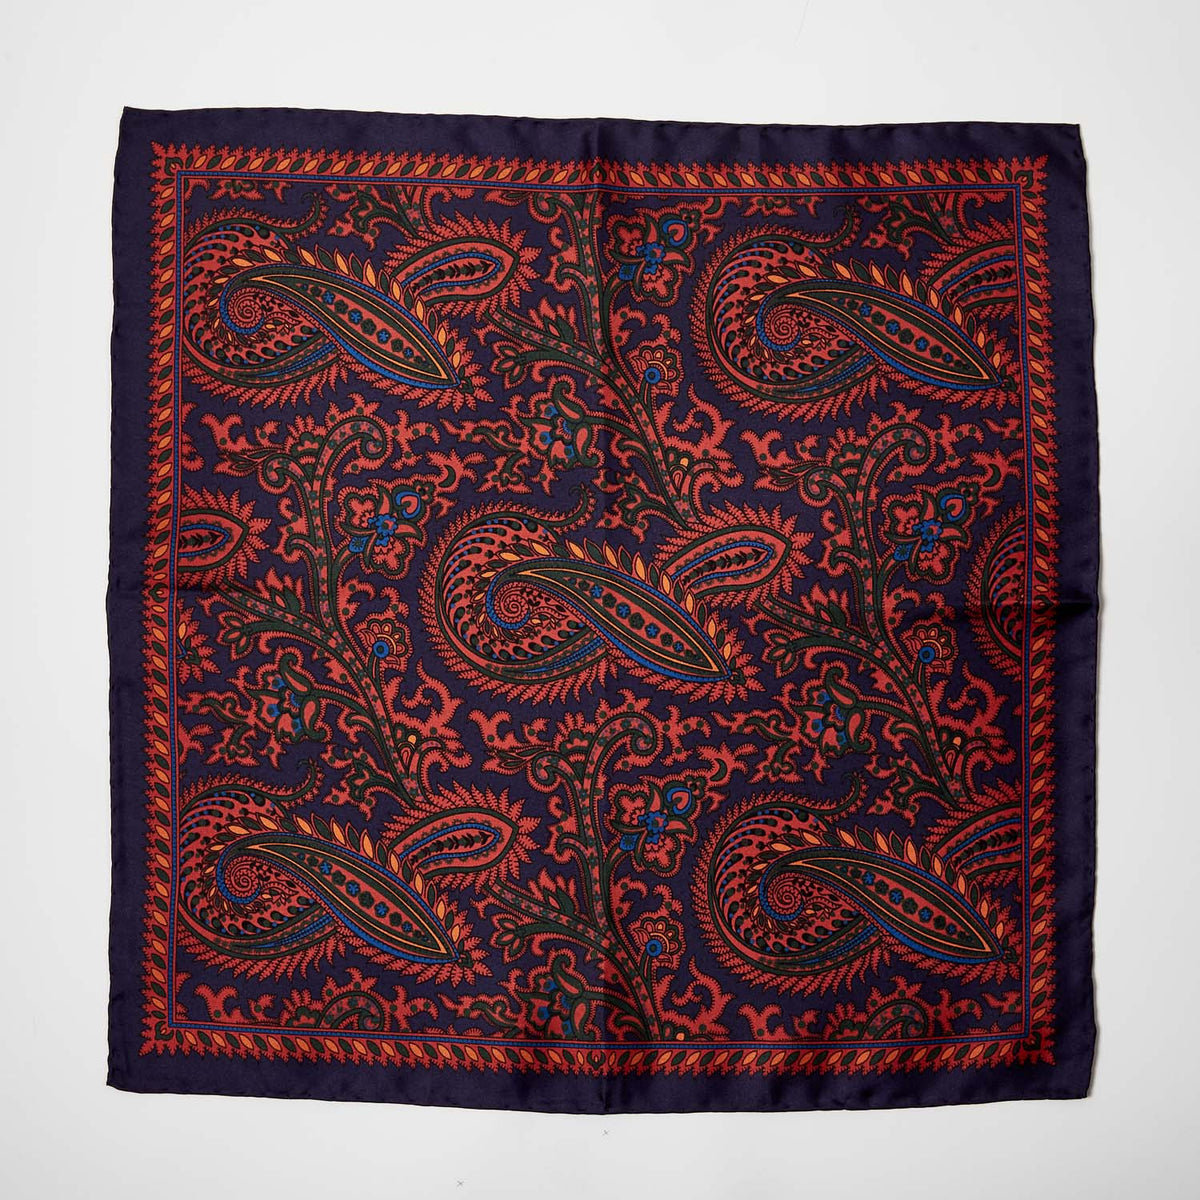 A Sovereign Grade 100% Silk Navy Pocket Square by KirbyAllison.com, featuring a blue and orange paisley pattern, perfect for adding formality to any outfit.